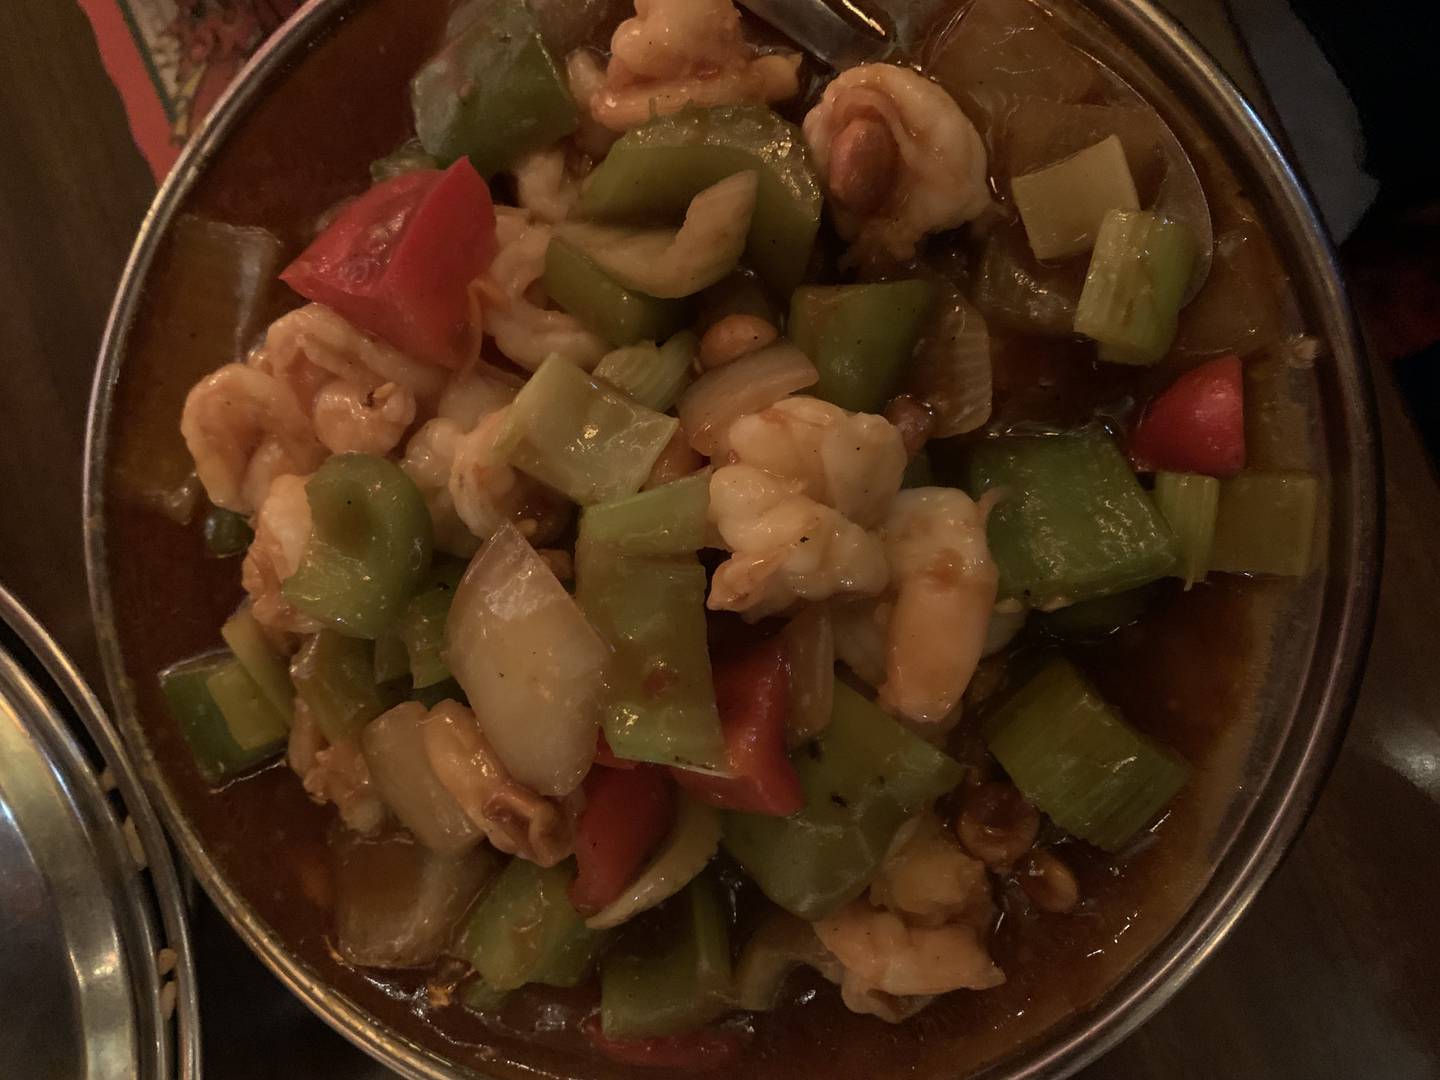 The Kung Poa Shrimp at The Breakers has green and red peppers, celery, onions and peanuts sautéed in a spicy garlic chili sauce.